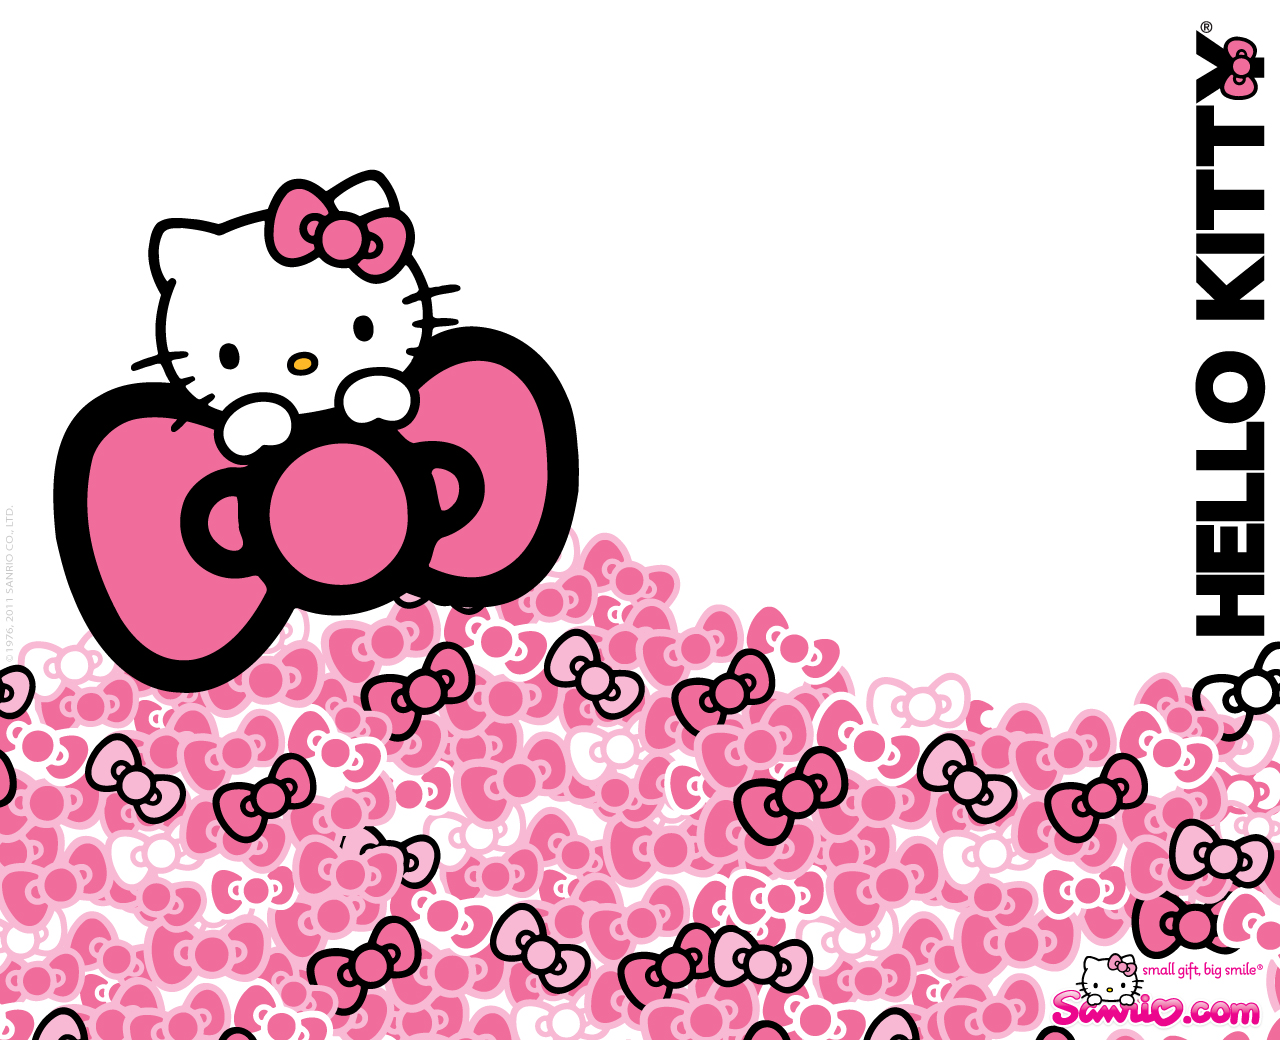 Free Download Wallpapers Hello Kitty Photo 2415 1280x1040 For Your Desktop Mobile Tablet Explore 78 Hello Kitty Wallpaper Images Hello Kitty Wallpaper Desktop Cute Hello Kitty Wallpaper Cute Kitty Wallpaper